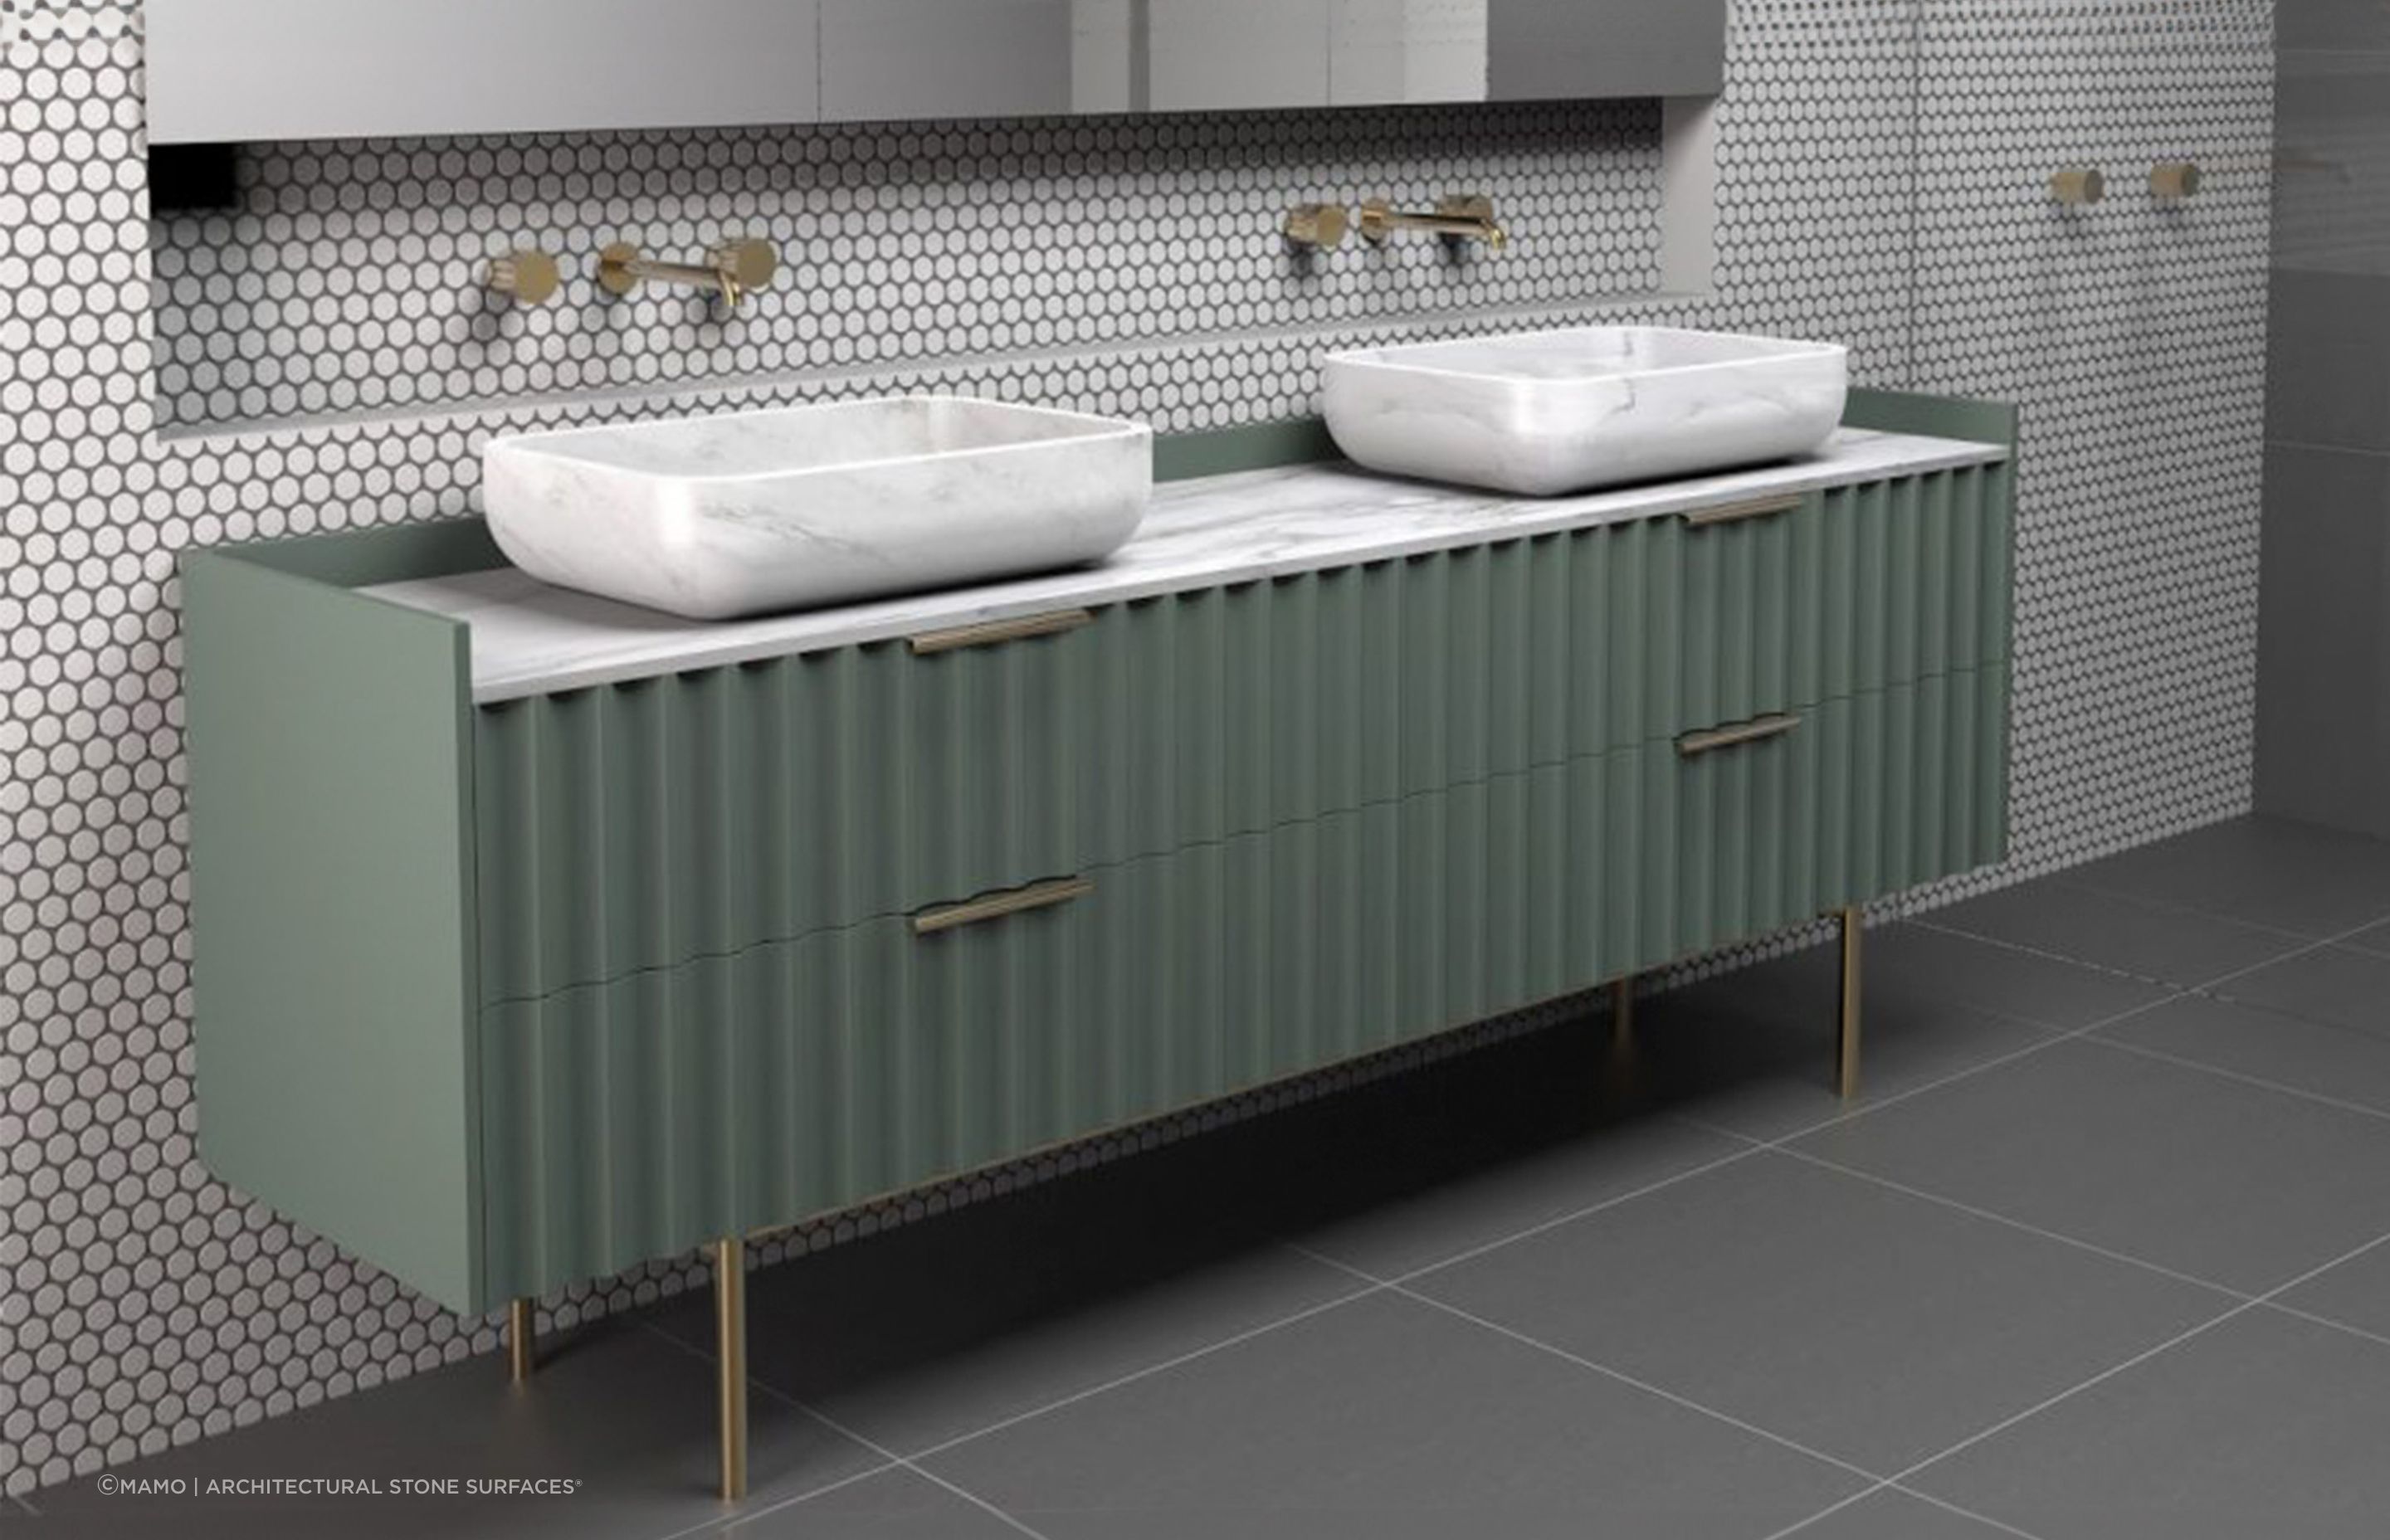 Bathroom vanities with plenty of storage space give you adequate room for all of your bathroom essentials